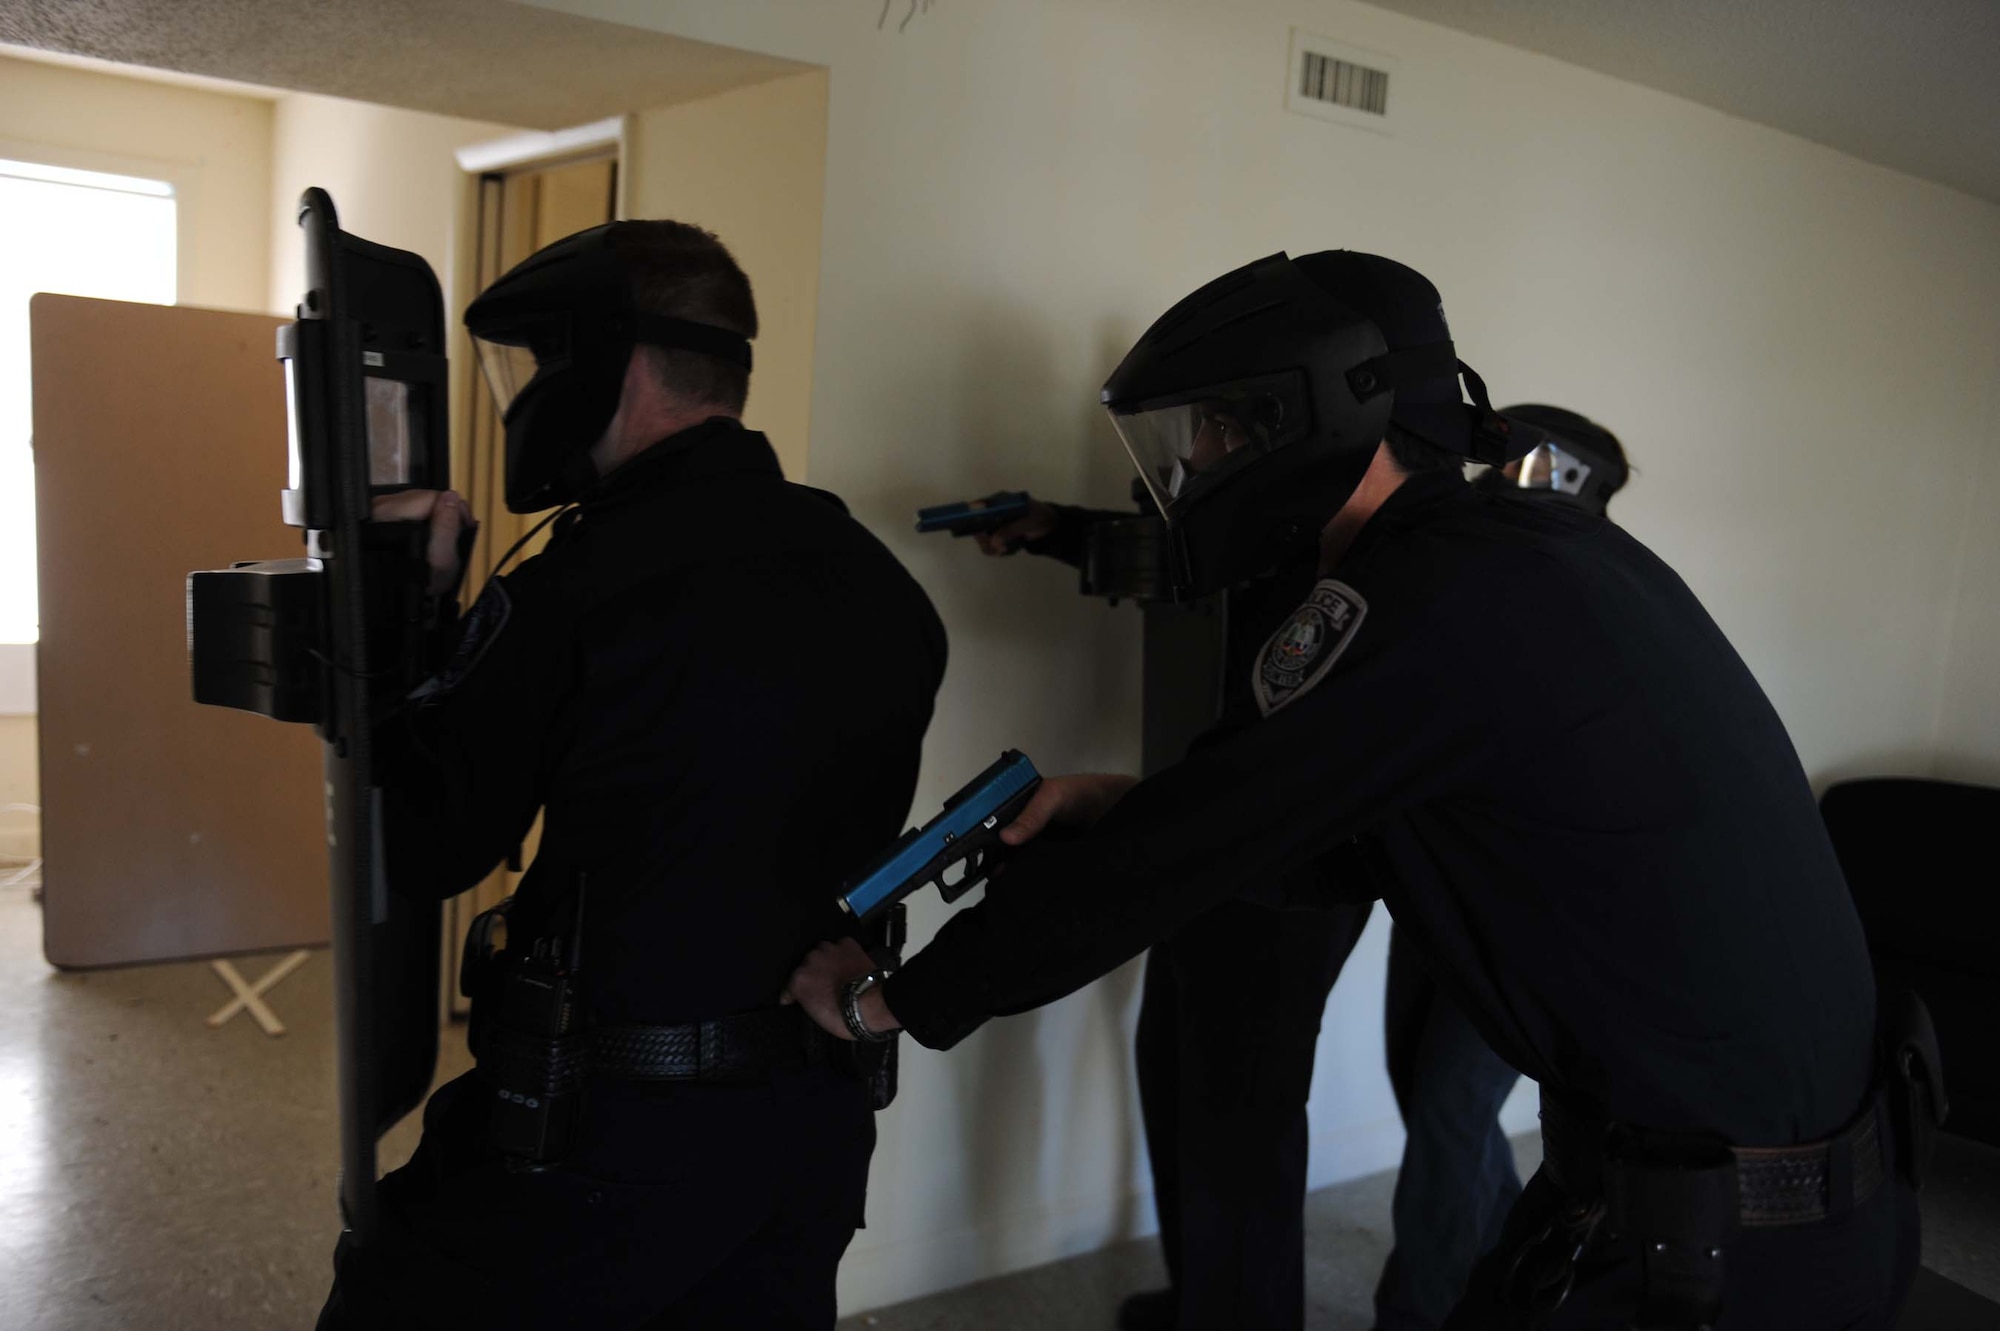 SHAW AIR FORCE BASE, S.C. -- Sumter County police officers approach a simulated hostile during a police training exercise April 4, 2009. The Sumter County Police Department and Shaw Airmen utilized older base housing for police training scenarios. (U.S. Air Force photo/Senior Airman Matt Davis)